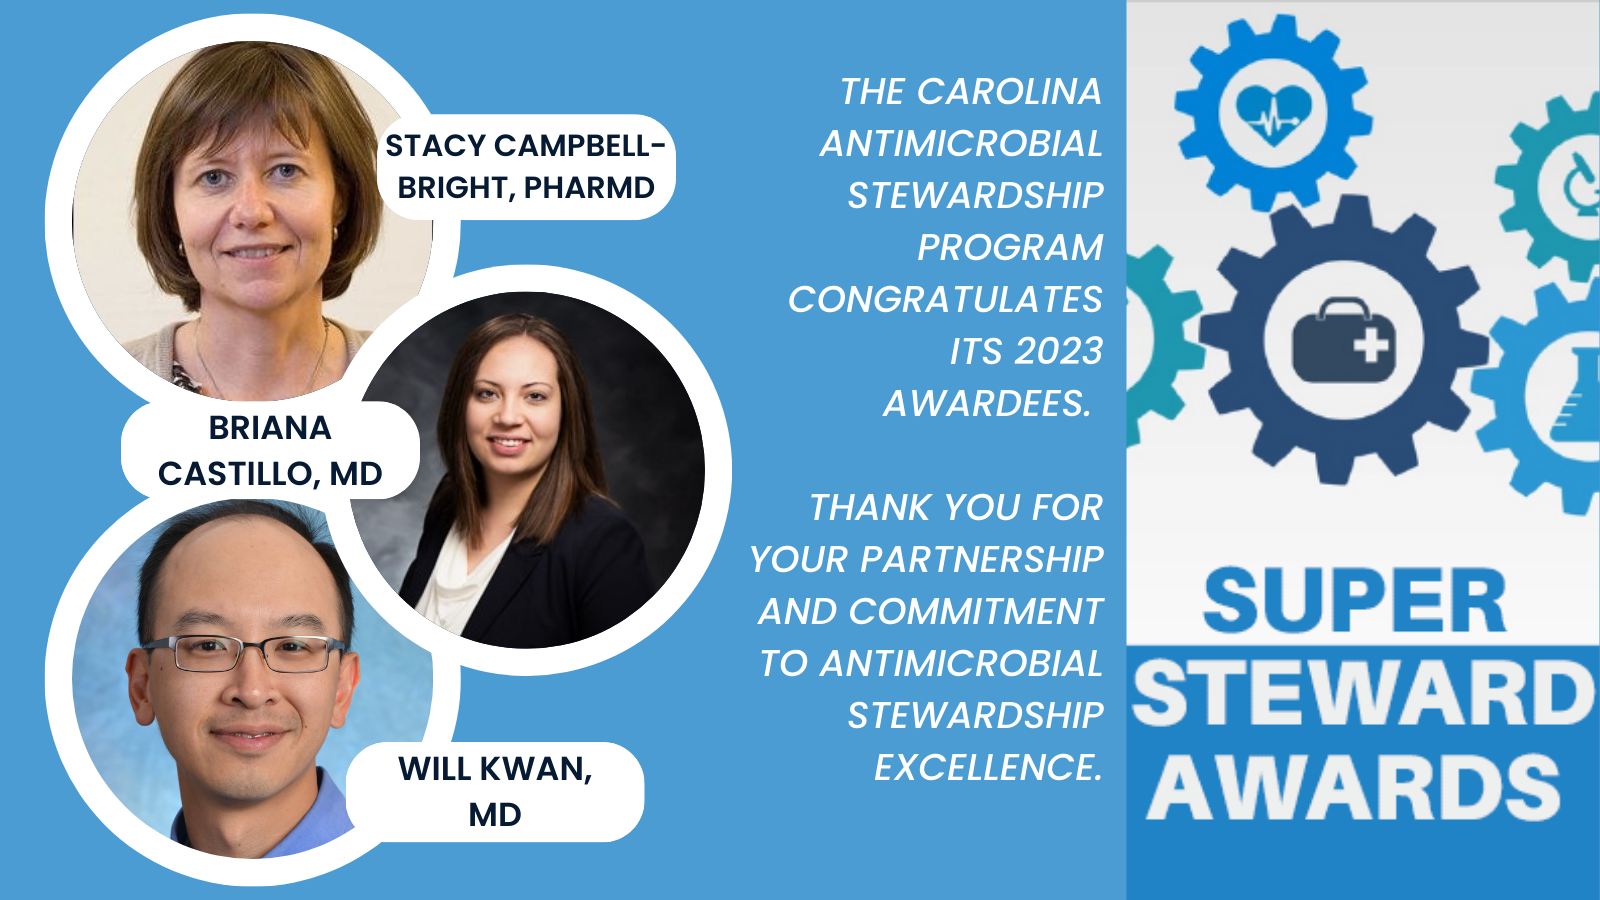 Super stewards awardees Stacy Campbell-Bright, Briana Castillo, and Will Kwan 2023